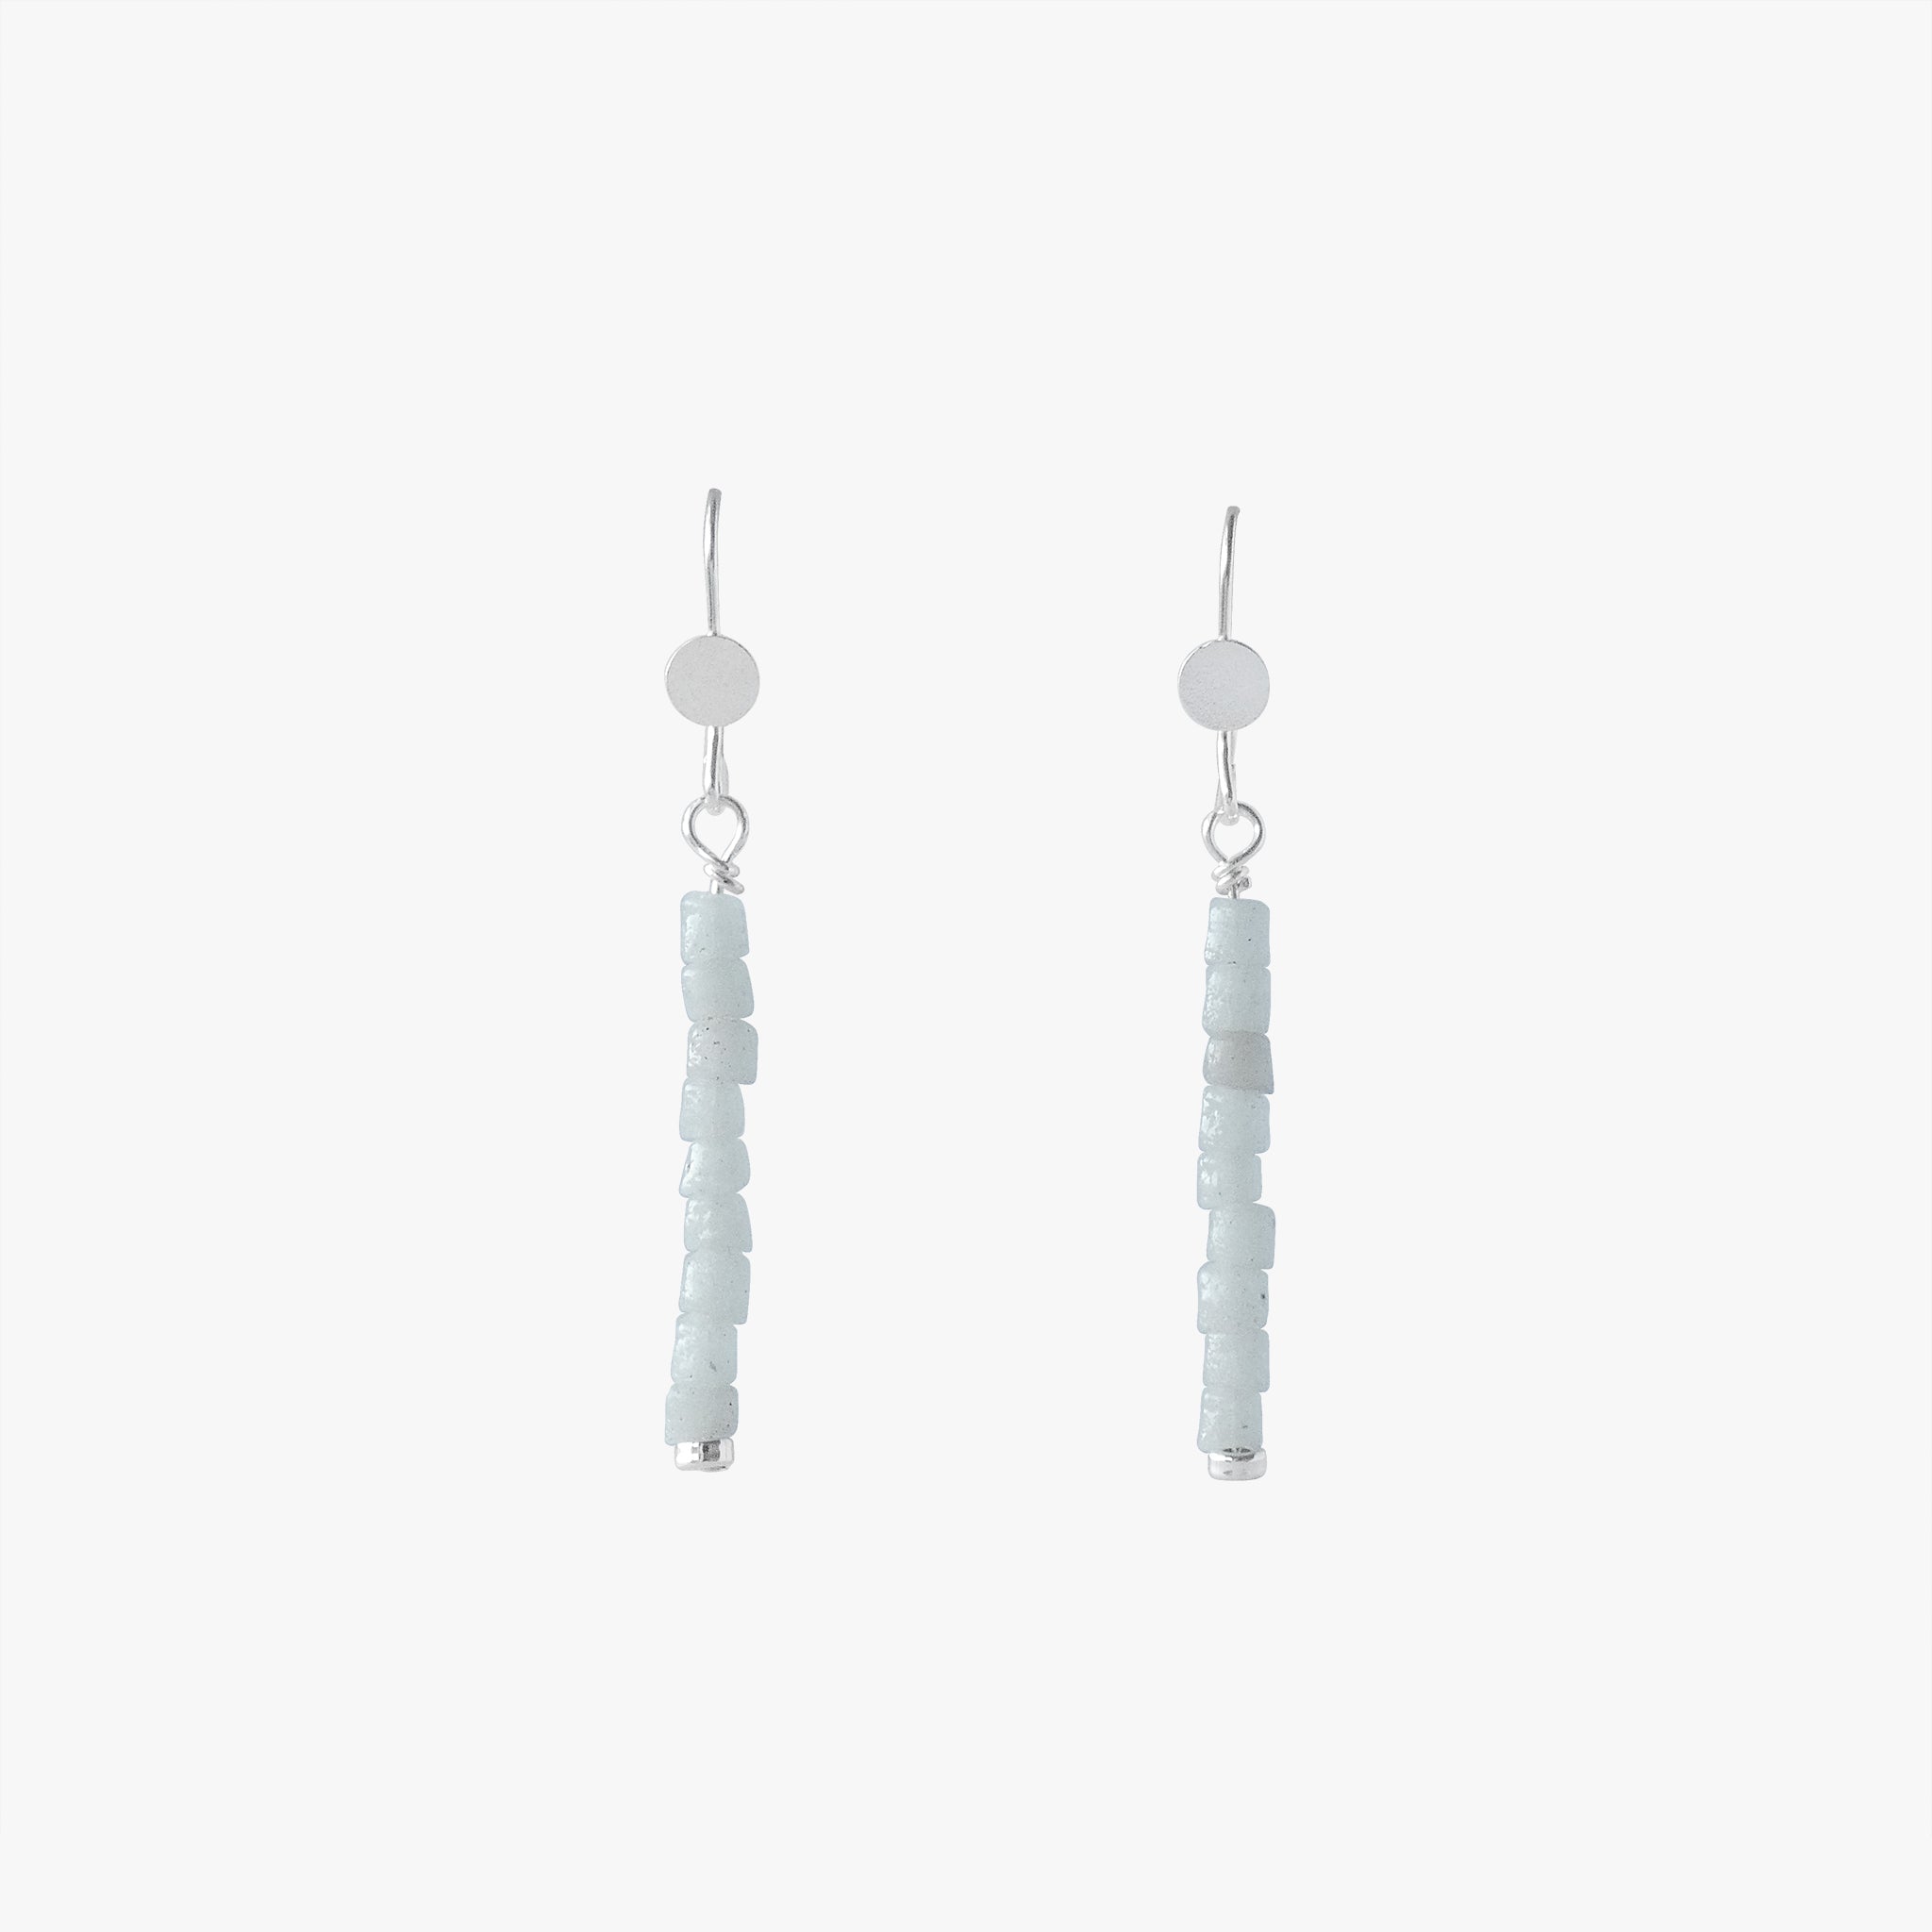 abaa O, ivory, recycled sterling silver, drop earrings